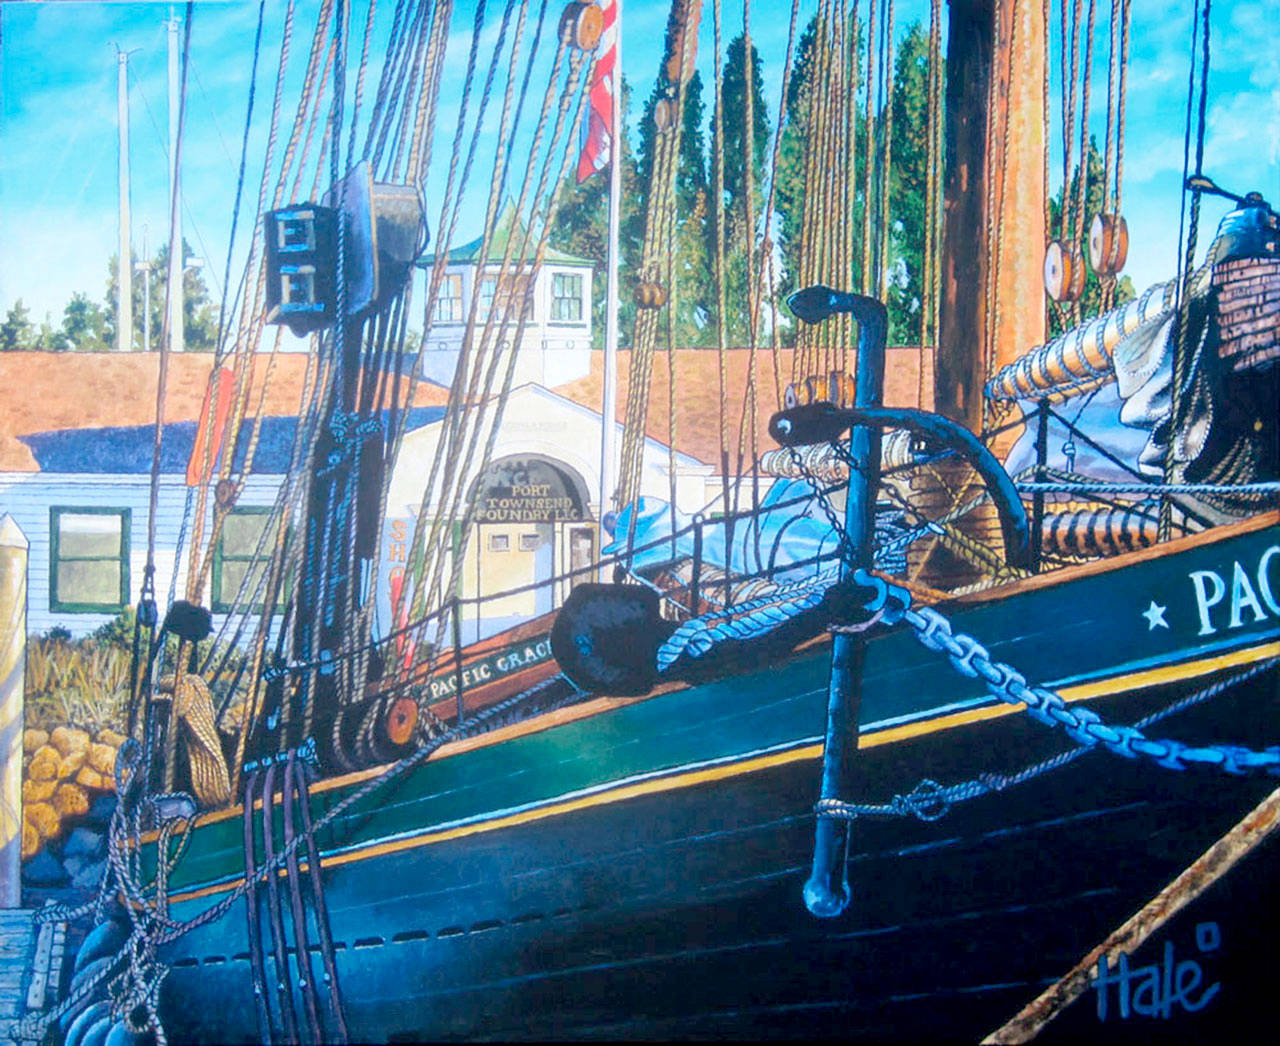 Michael Hale’s wooden boat paintings will be on display at Gallery 9 for the Port Townsend Gallery Walk Saturday. (Michael Hale)